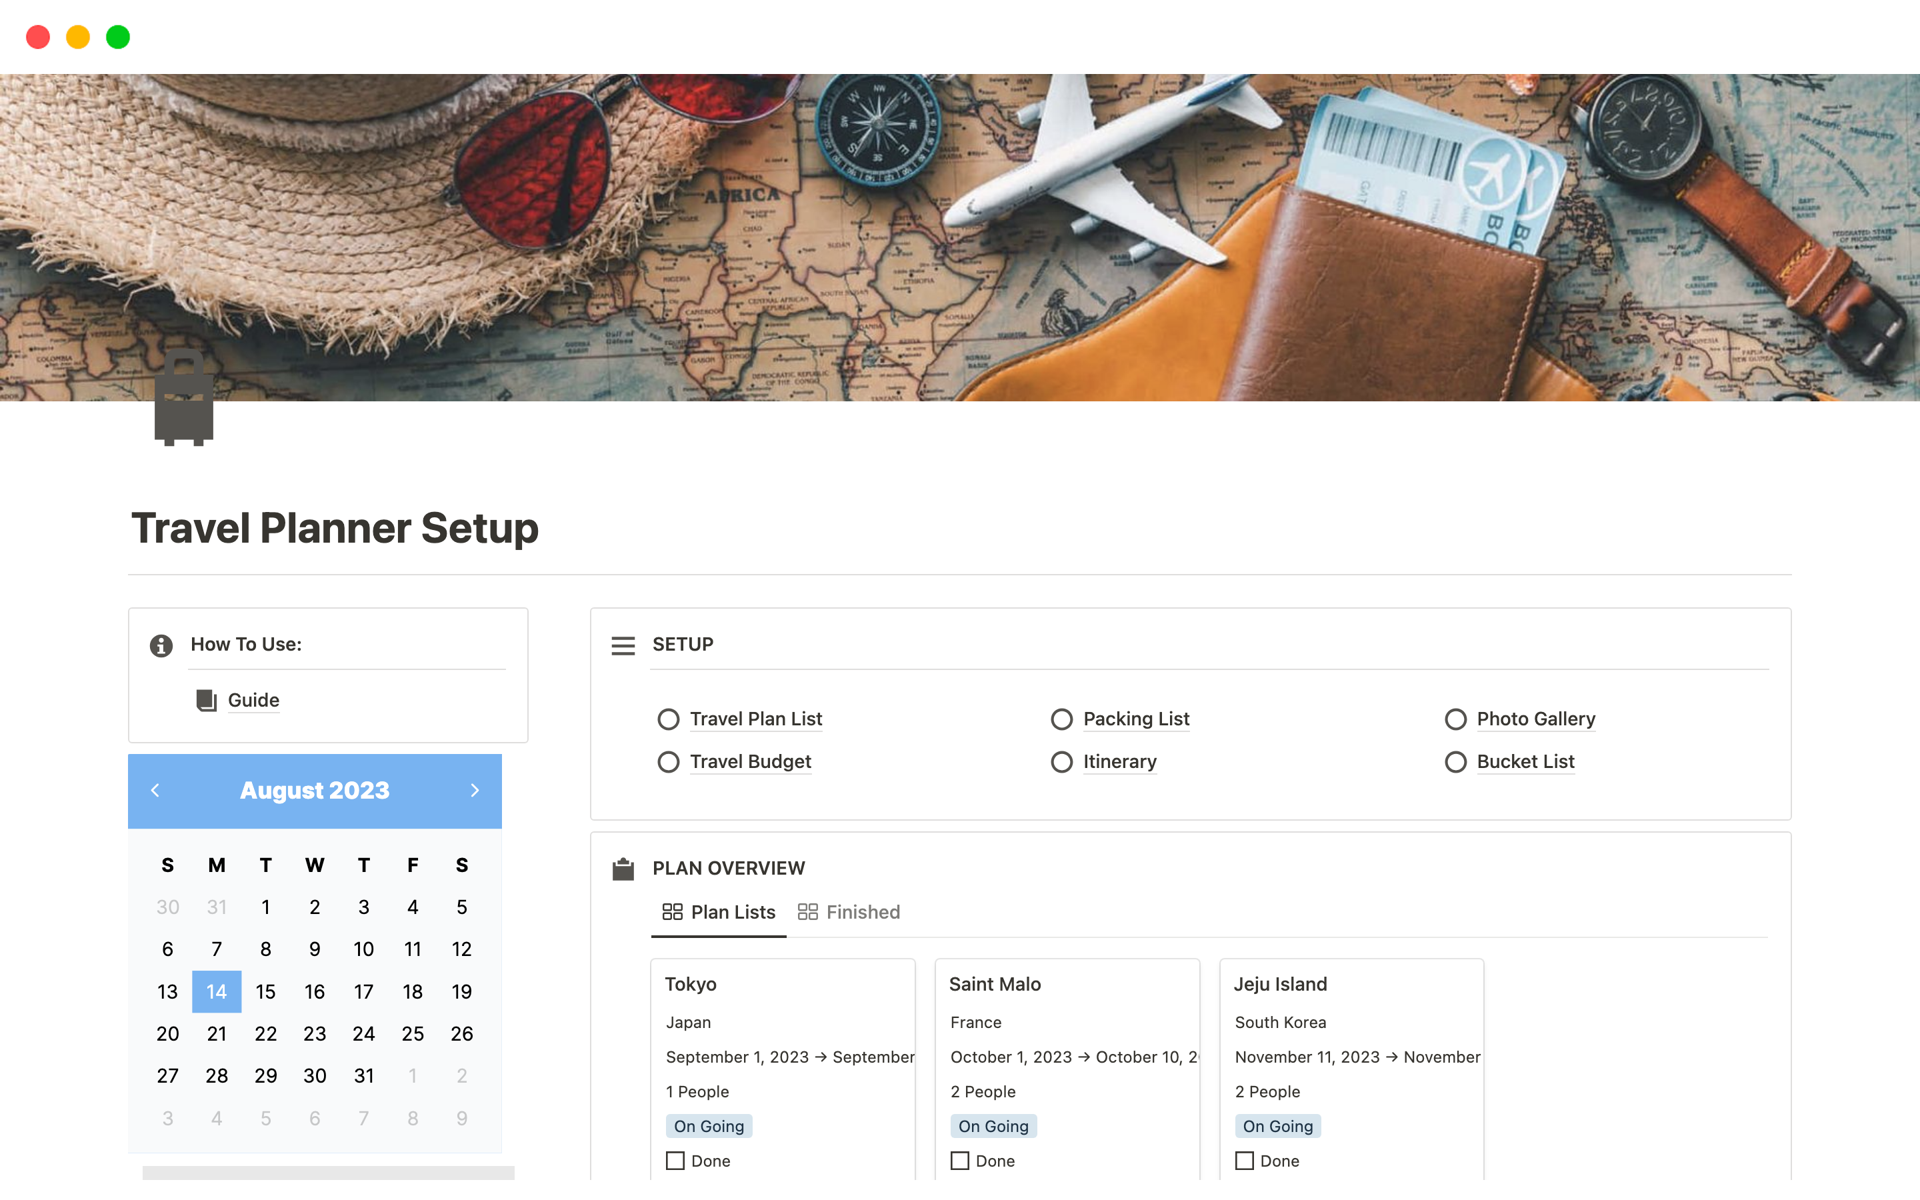 Create Your Travel Plan with Ease Using This Travel Planner Setup.